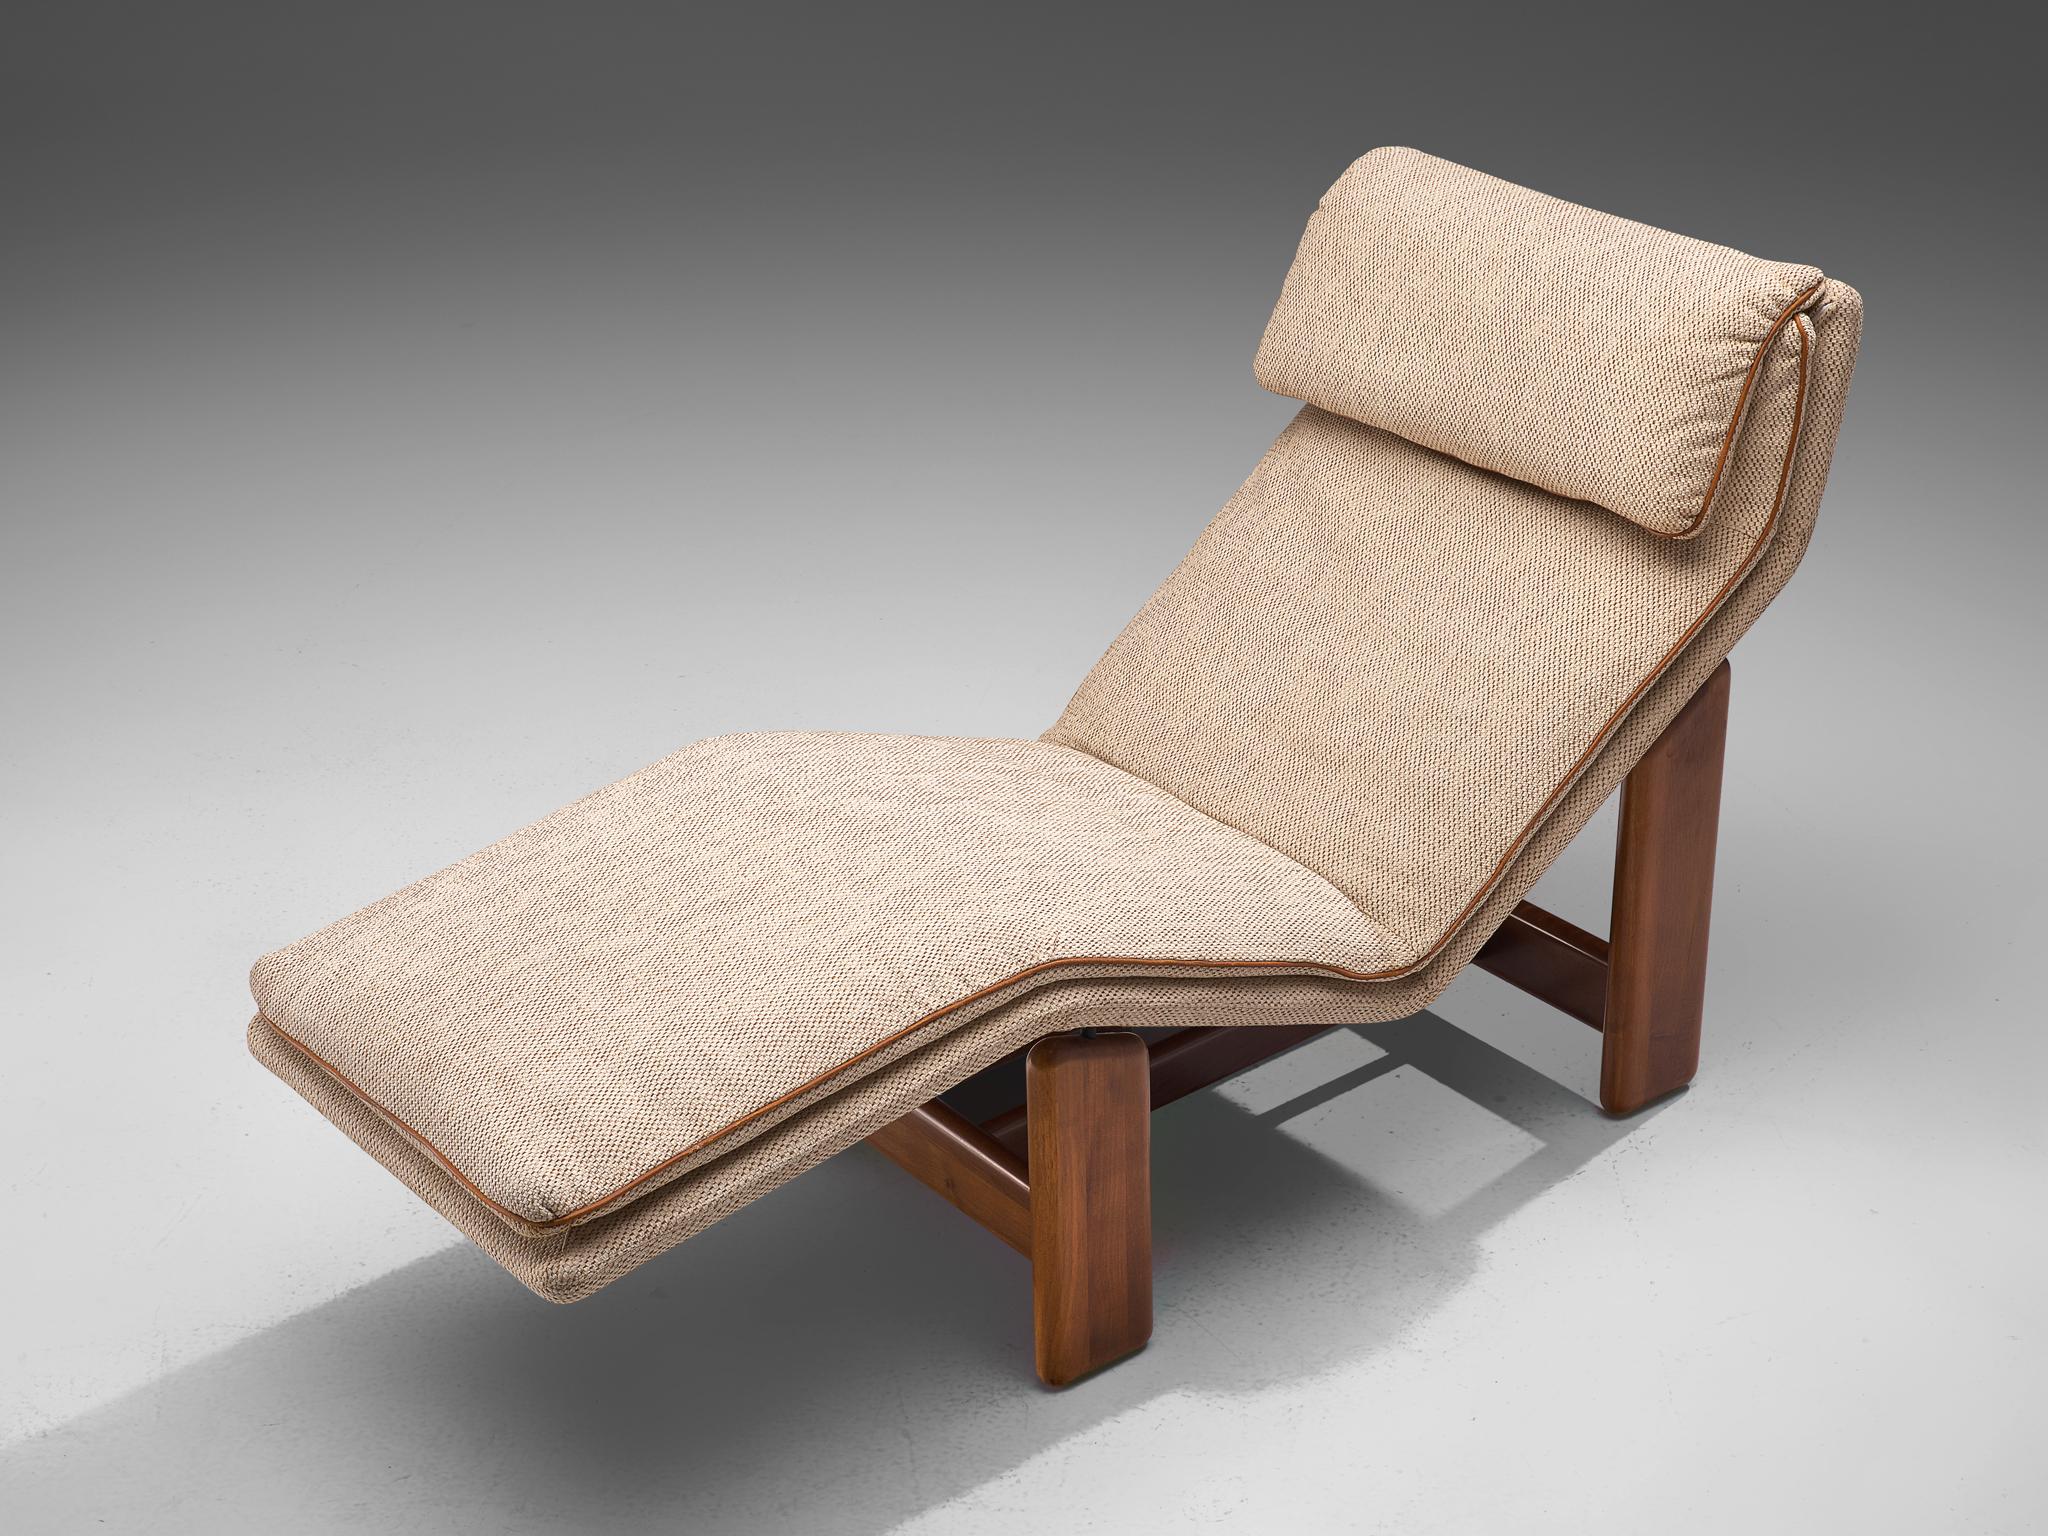 Late 20th Century Italian Chaise Longue in Beige Fabric and Walnut by Mobil Girgi